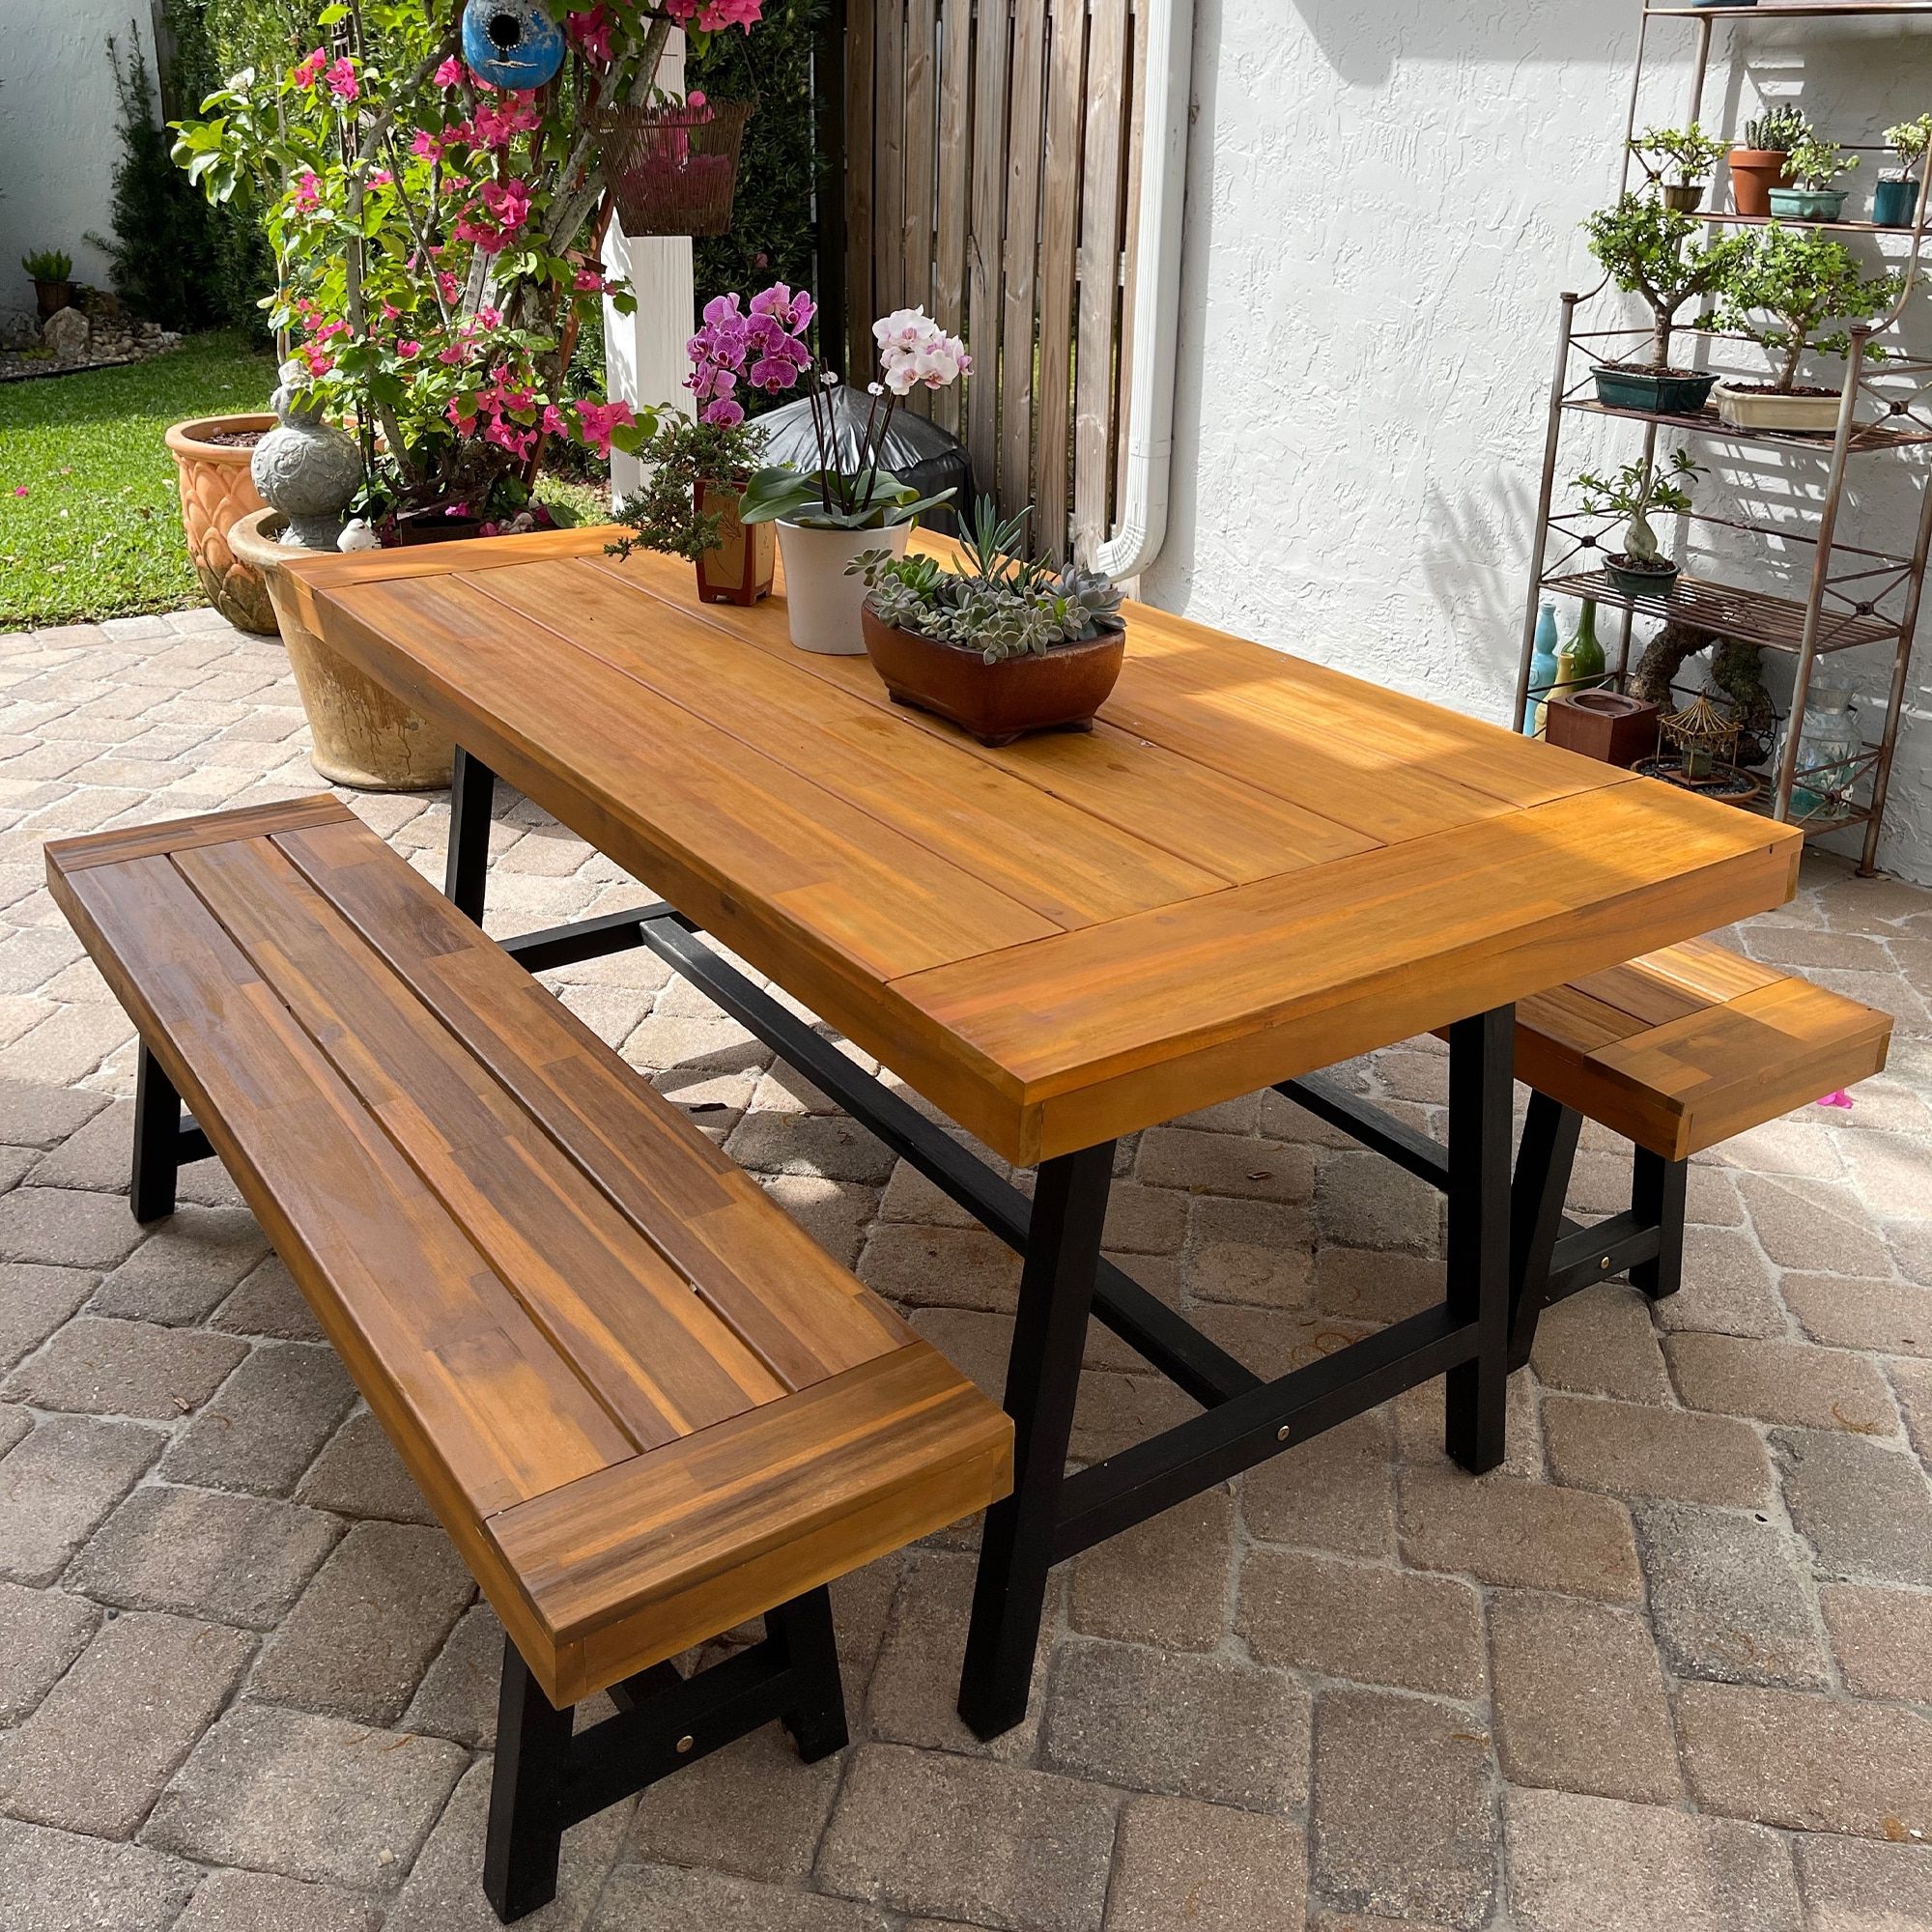 Most Recently Released 3pcs Outdoor Patio Dining Table Set Acacia Wood With 1 Rectangular Picnic  Coffee Table And 2 Benches – On Sale – Overstock – 32603834 Intended For Outdoor Terrace Bench Wood Furniture Set (View 14 of 15)